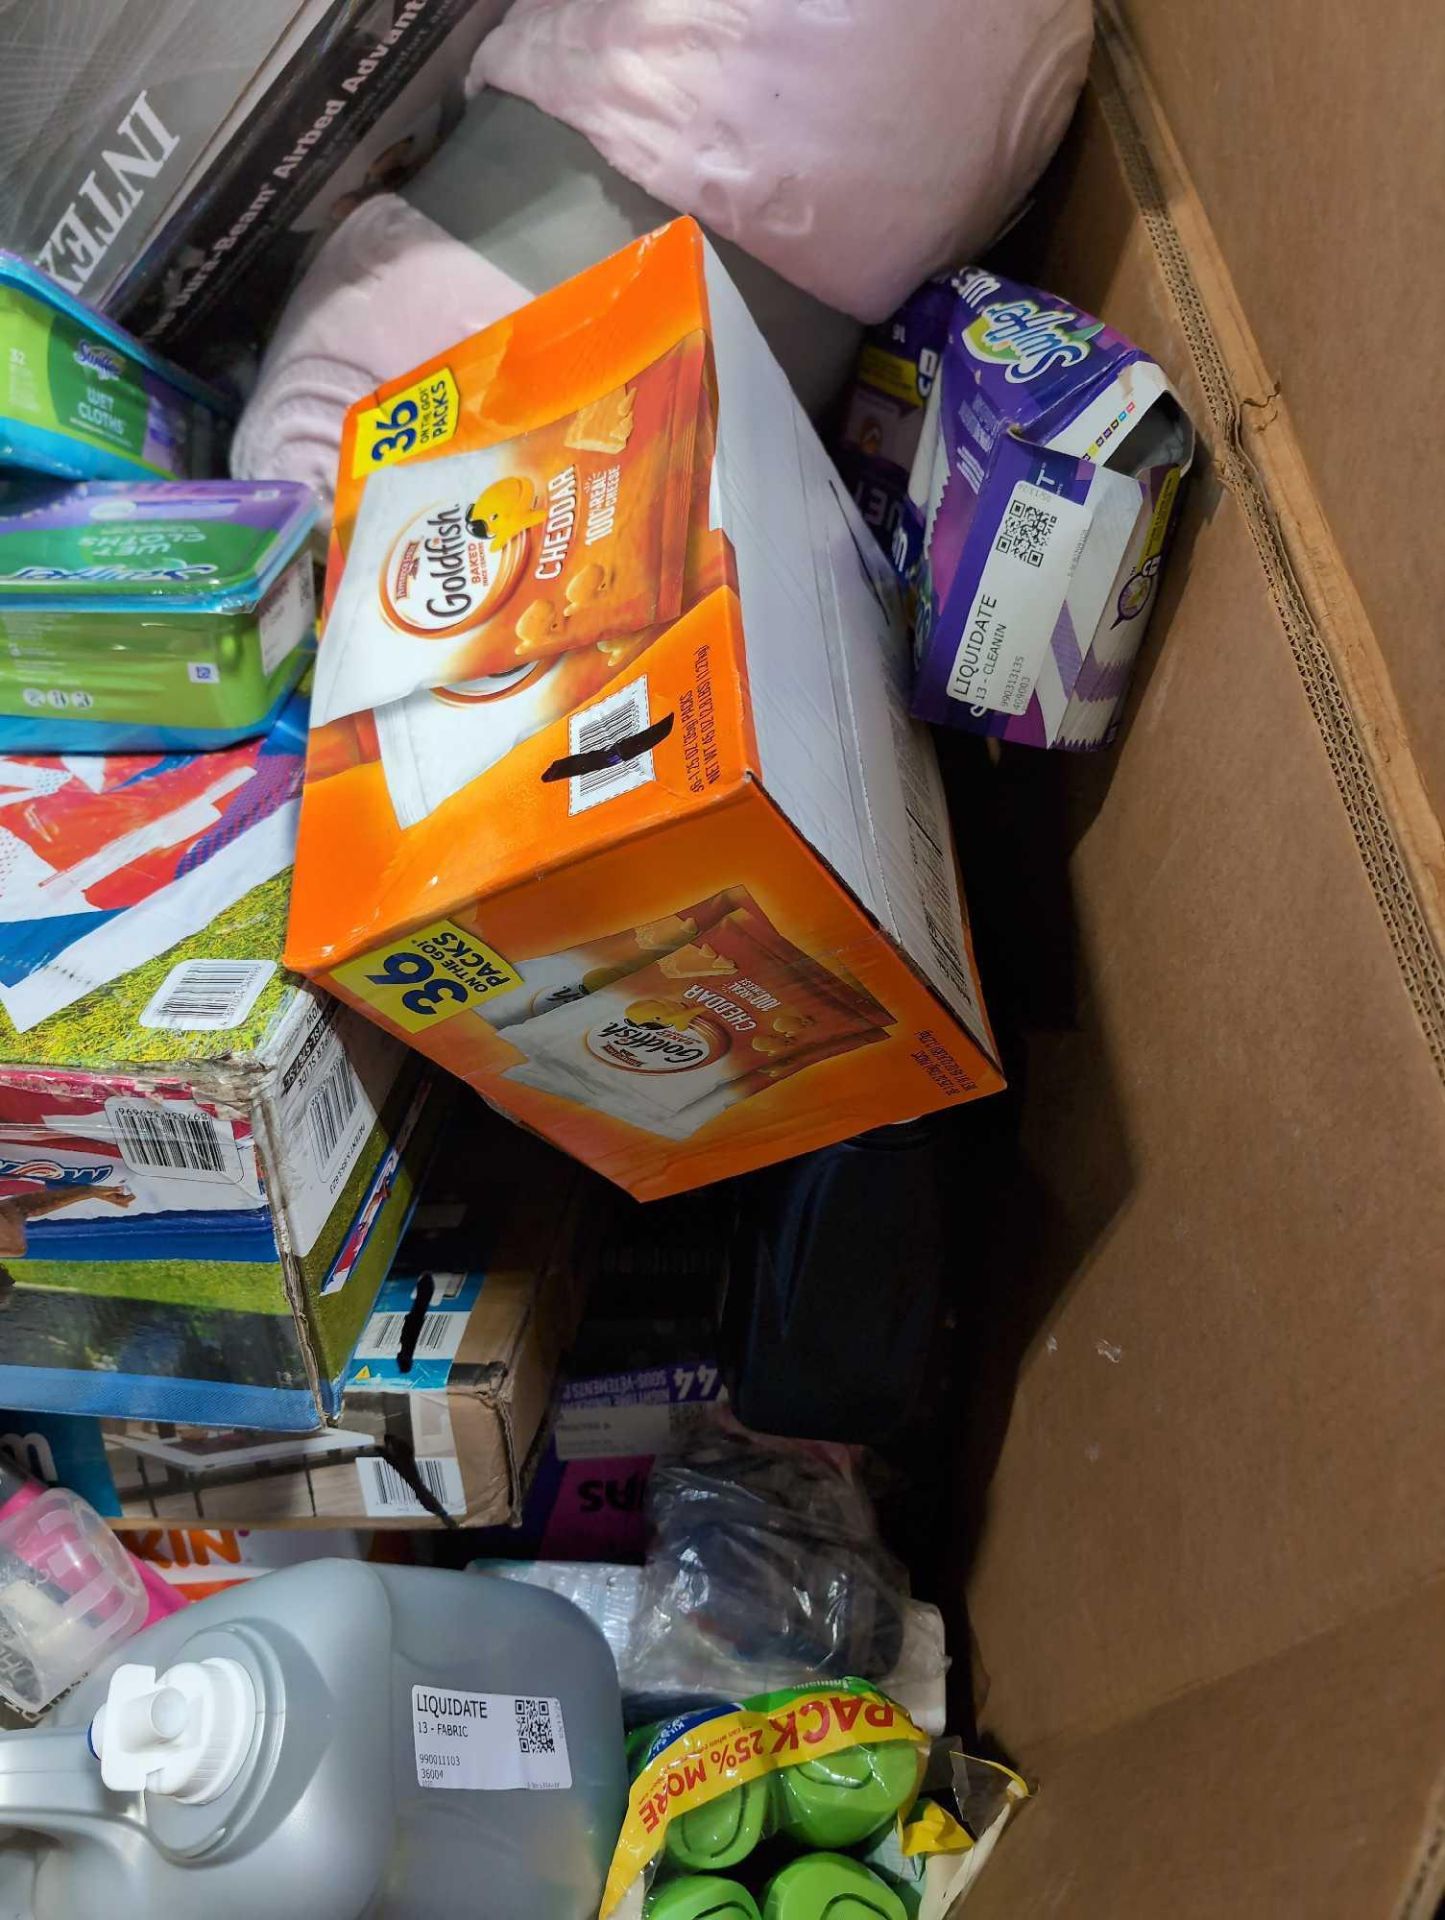 Big box store in a box, pampers, Sheets, Blanket, Intex blow up bed, swiffer wet cloths, gold fish, - Image 10 of 20